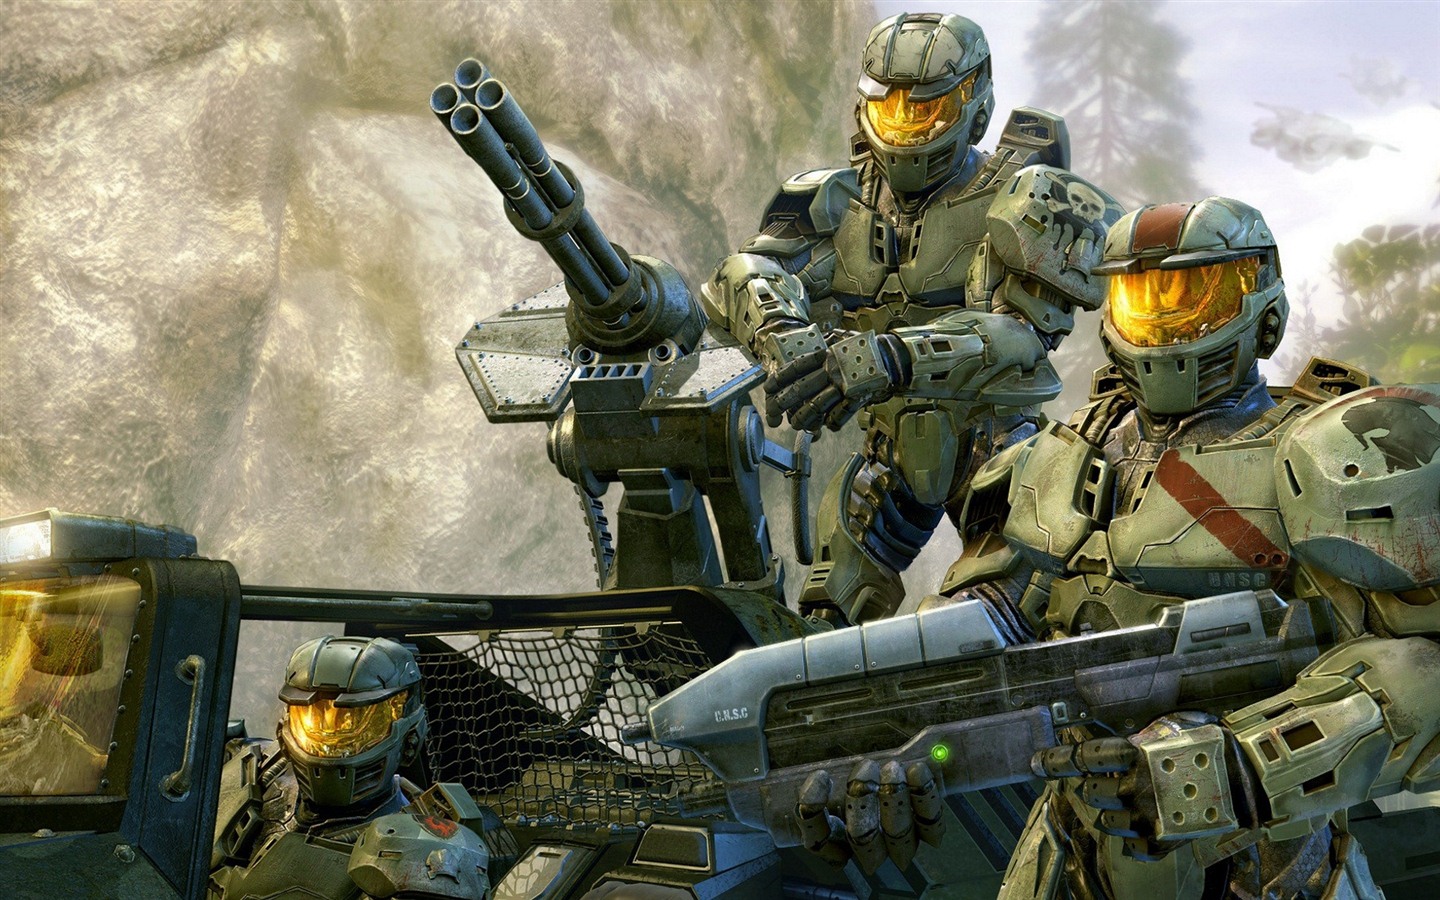 Halo Game HD Wallpapers #7 - 1440x900